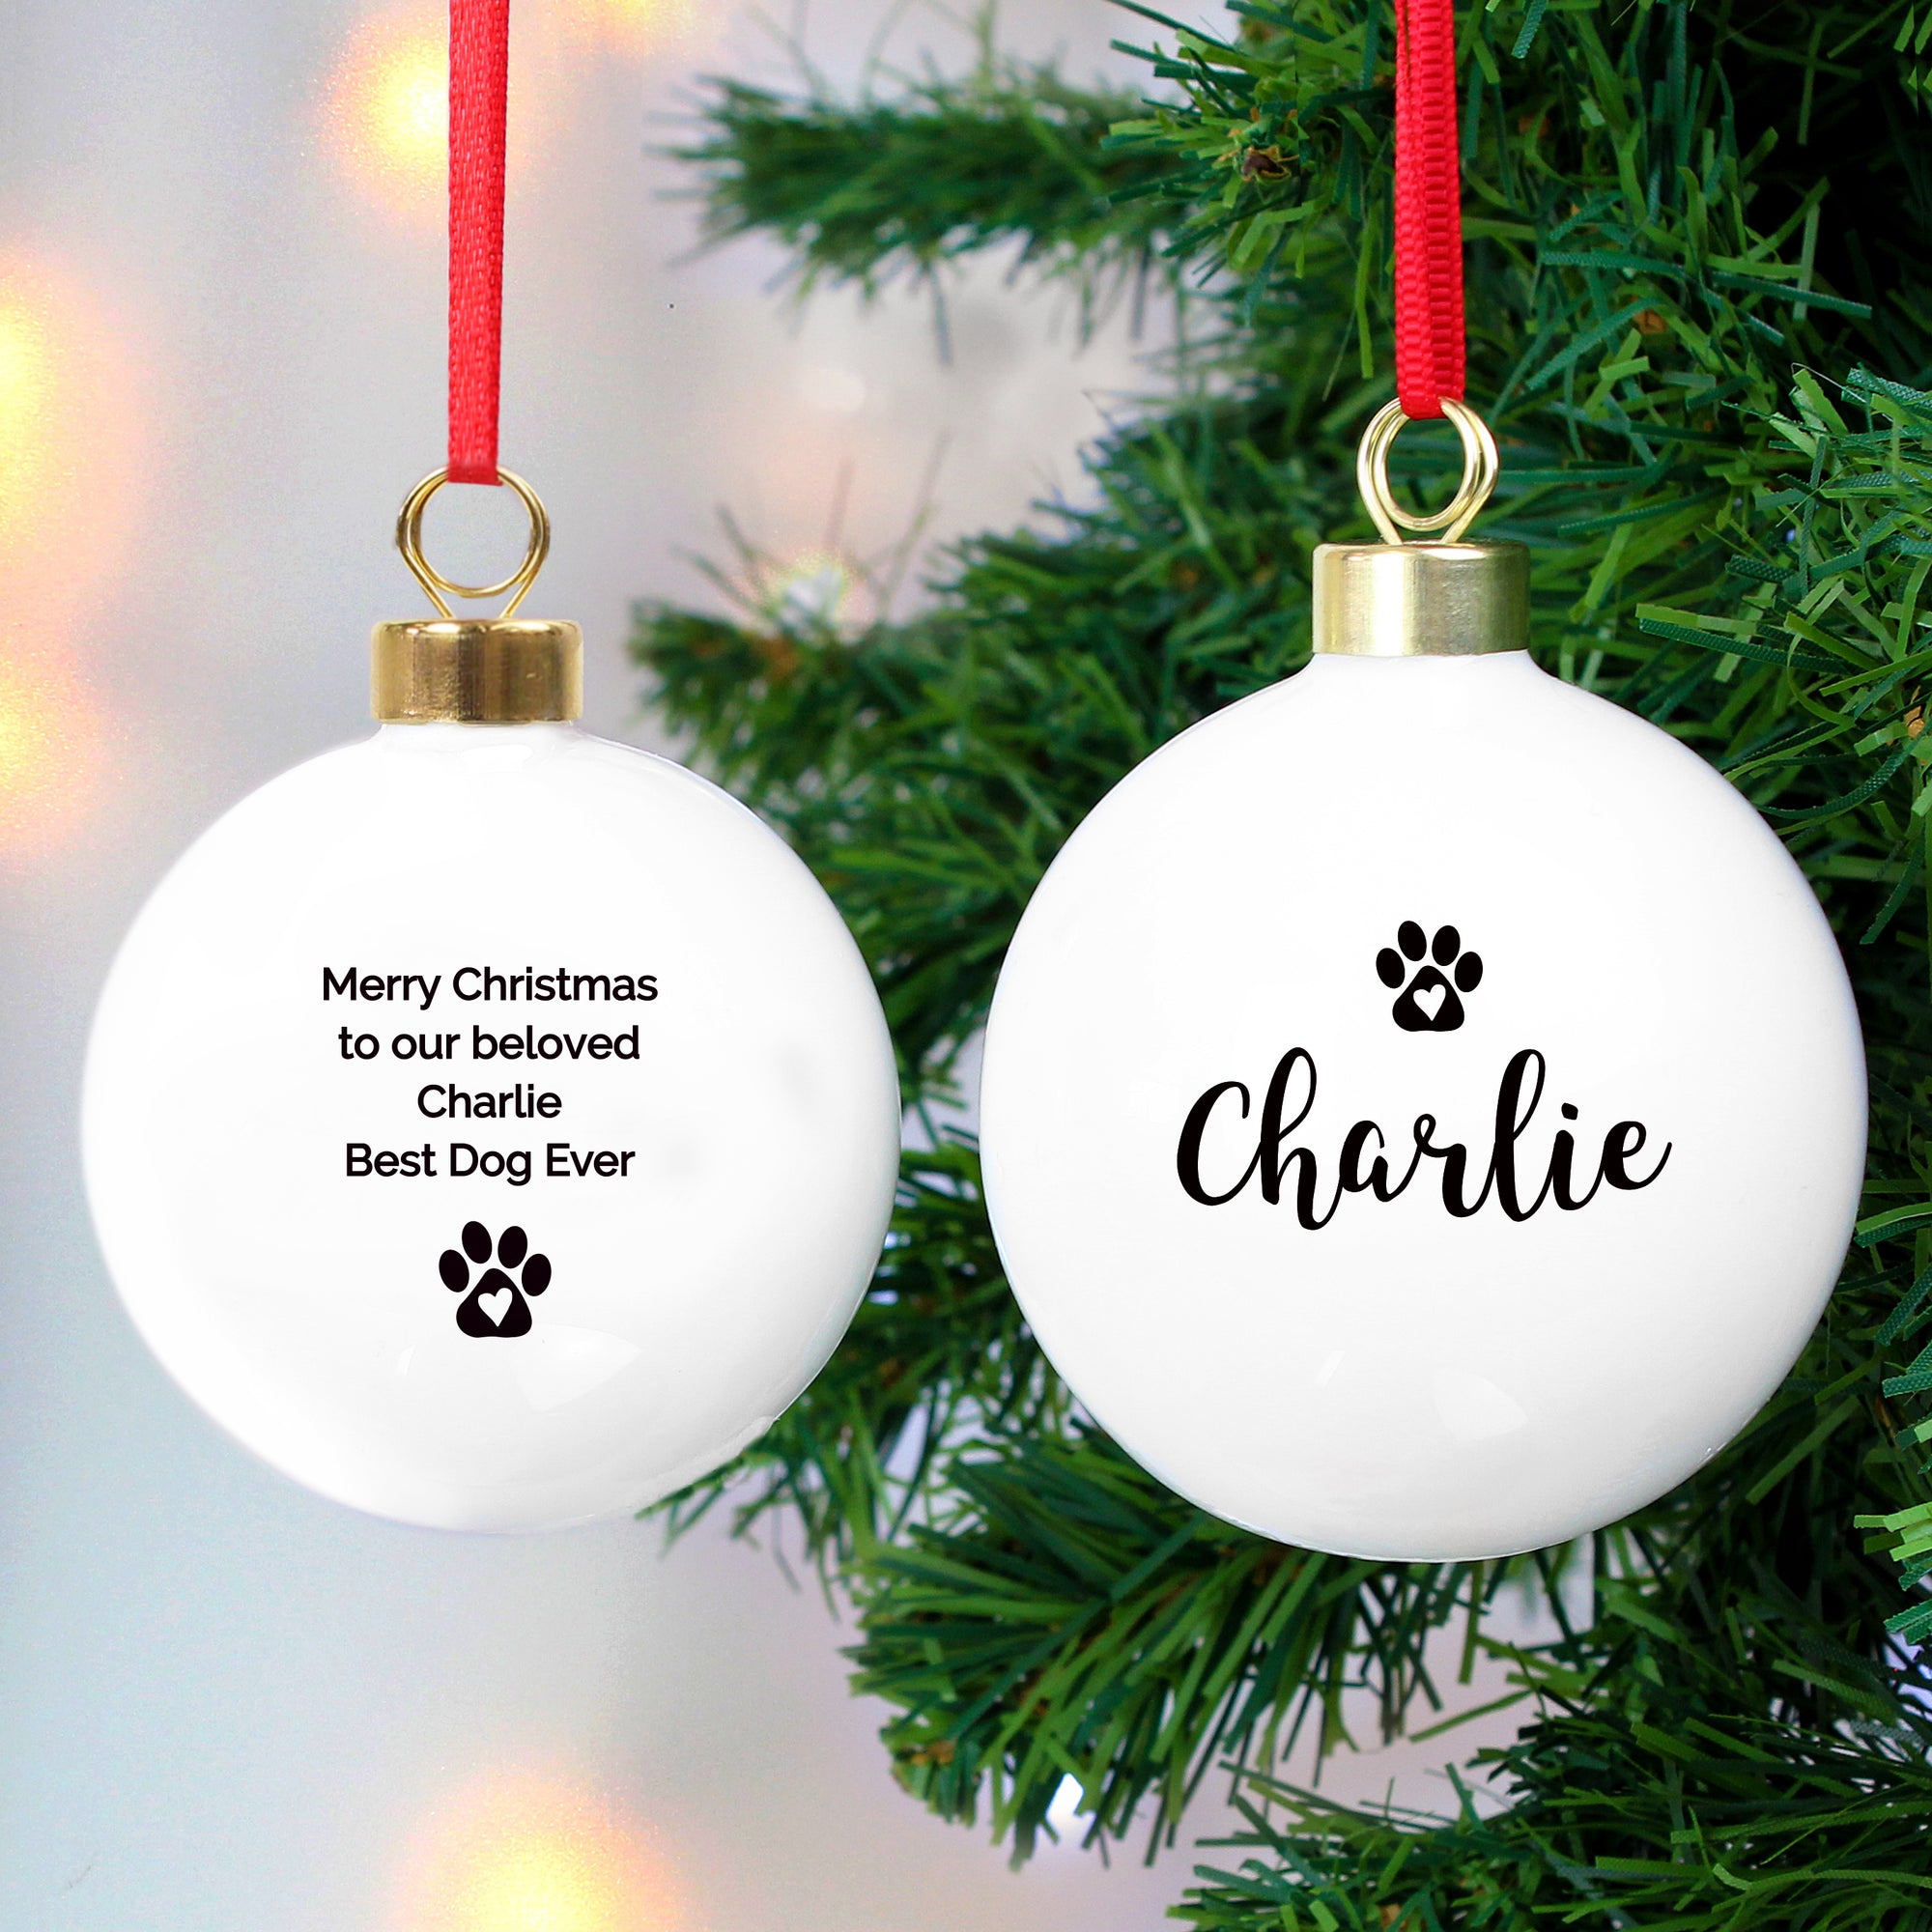 Personalised Christmas bauble for a pet. This white ceramic Christmas tree bauble can be personalised on the front with a name of up to 12 characters which will be printed in a black modern italic font and there is a black paw print with a white heart inside it above the name. The rear of the bauble can be personalised with your own mesage over up to 4 lines of 20 characters per line which will be printed in black. There is also a black paw print with a white heart inside it printed underneath the message.